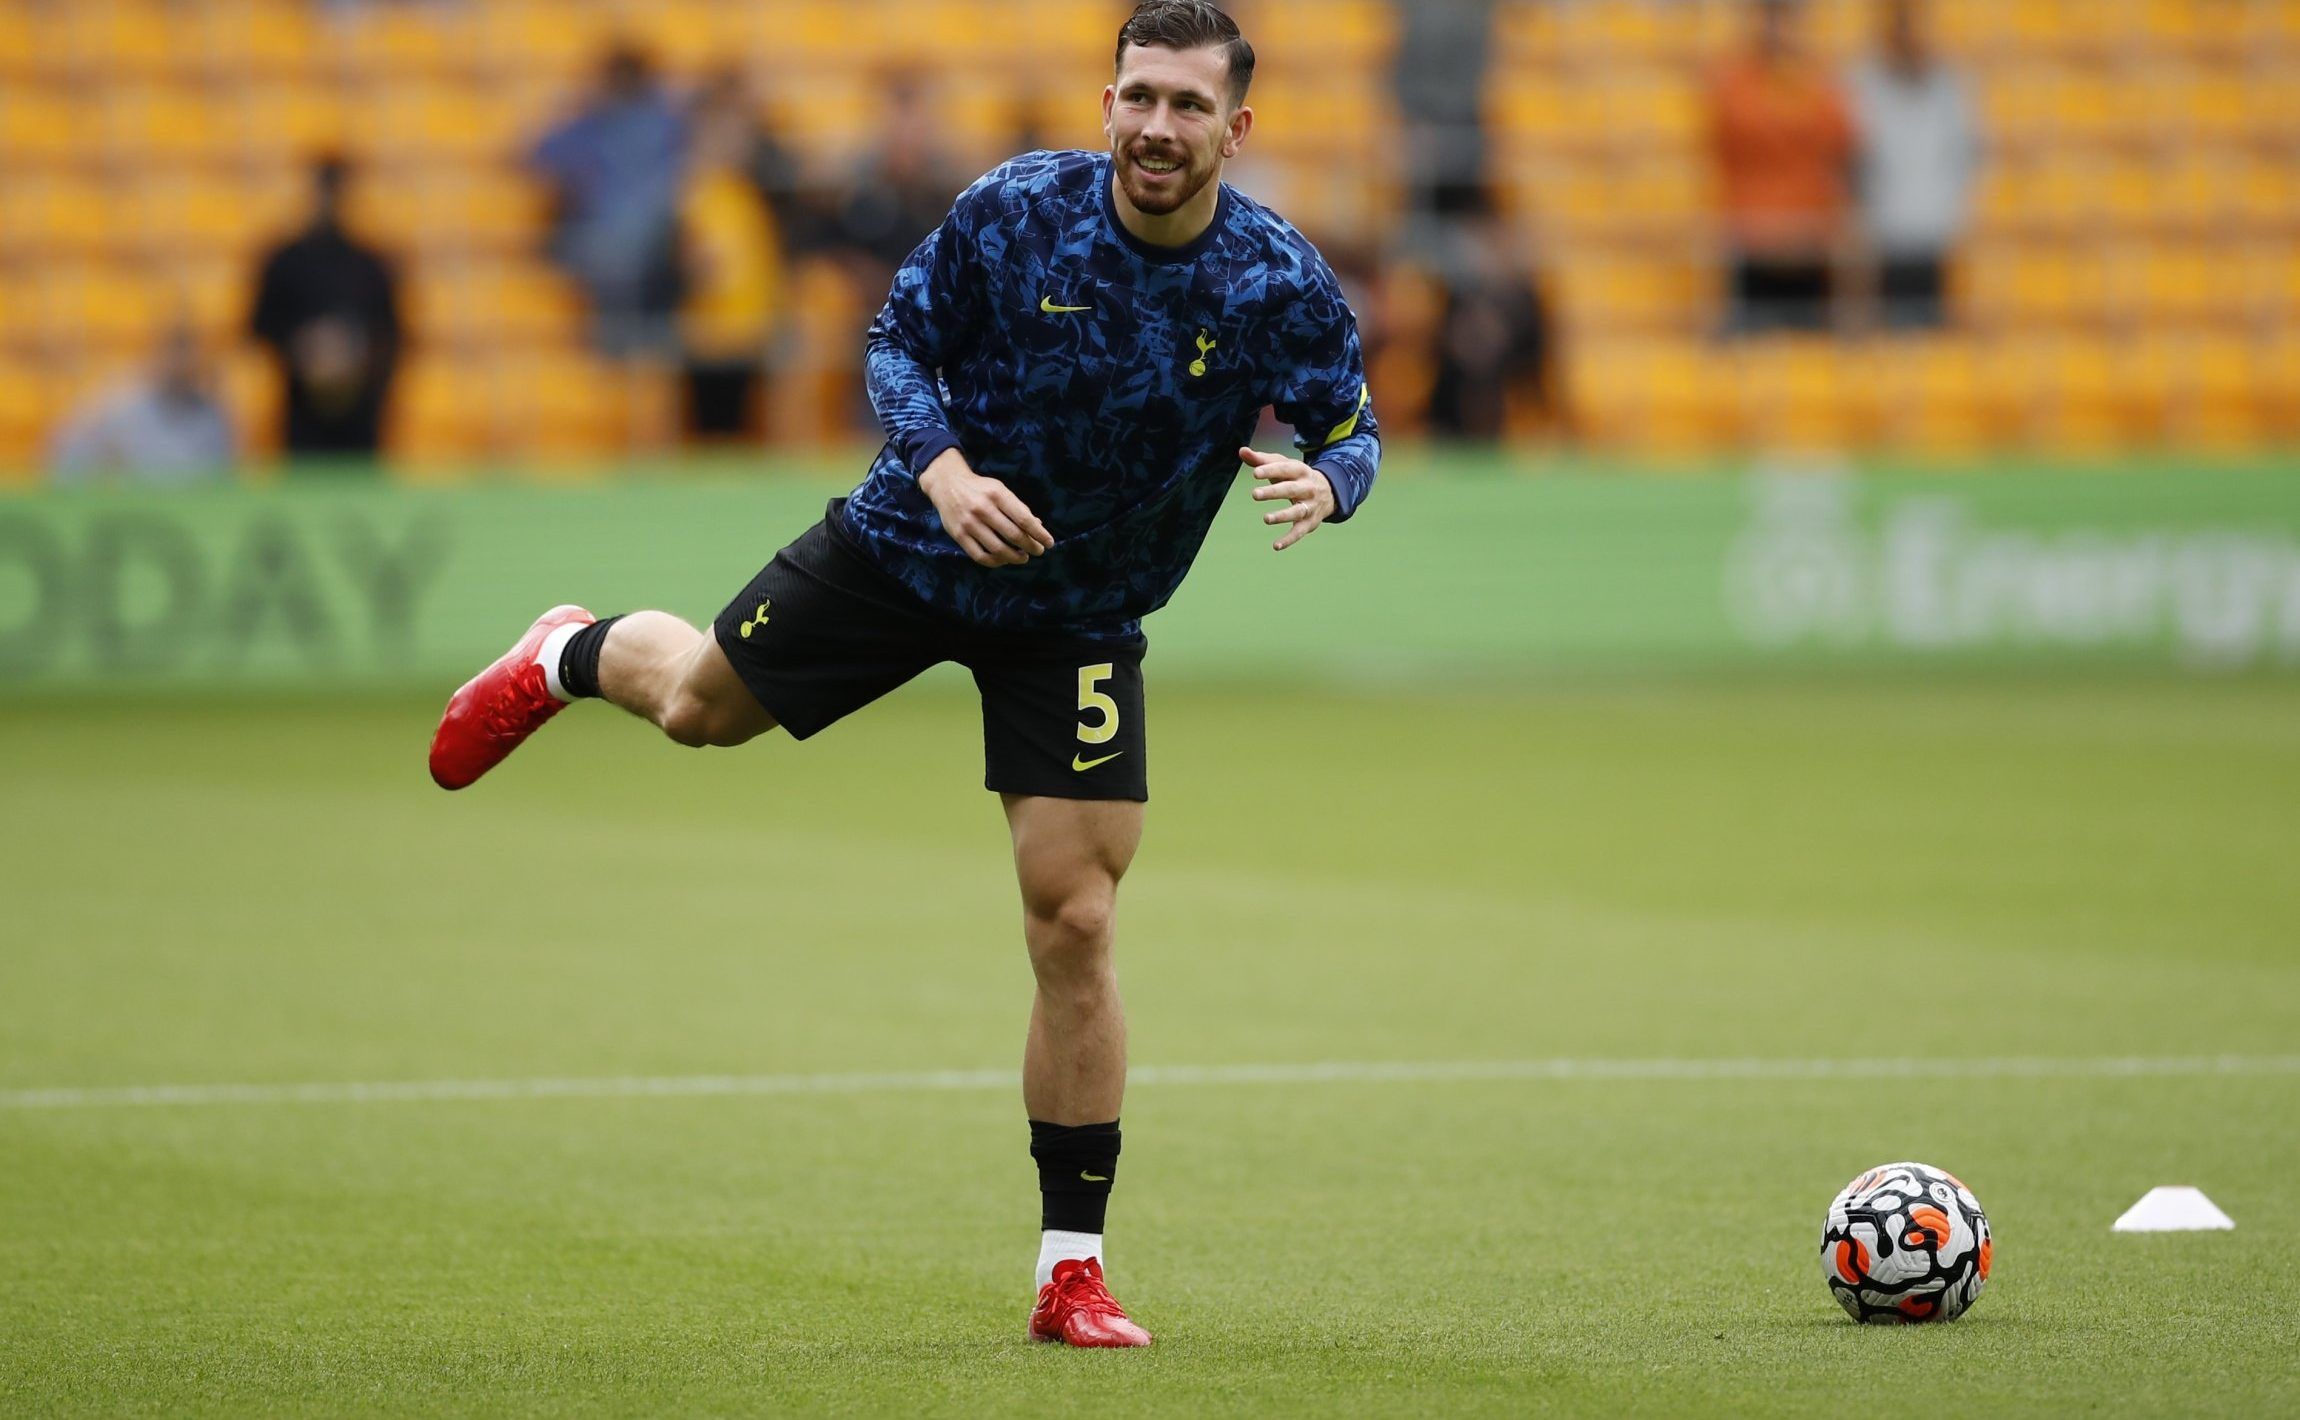 Spurs midfielder Pierre-Emile Hojbjerg during warm up against Wolves in the Premier League